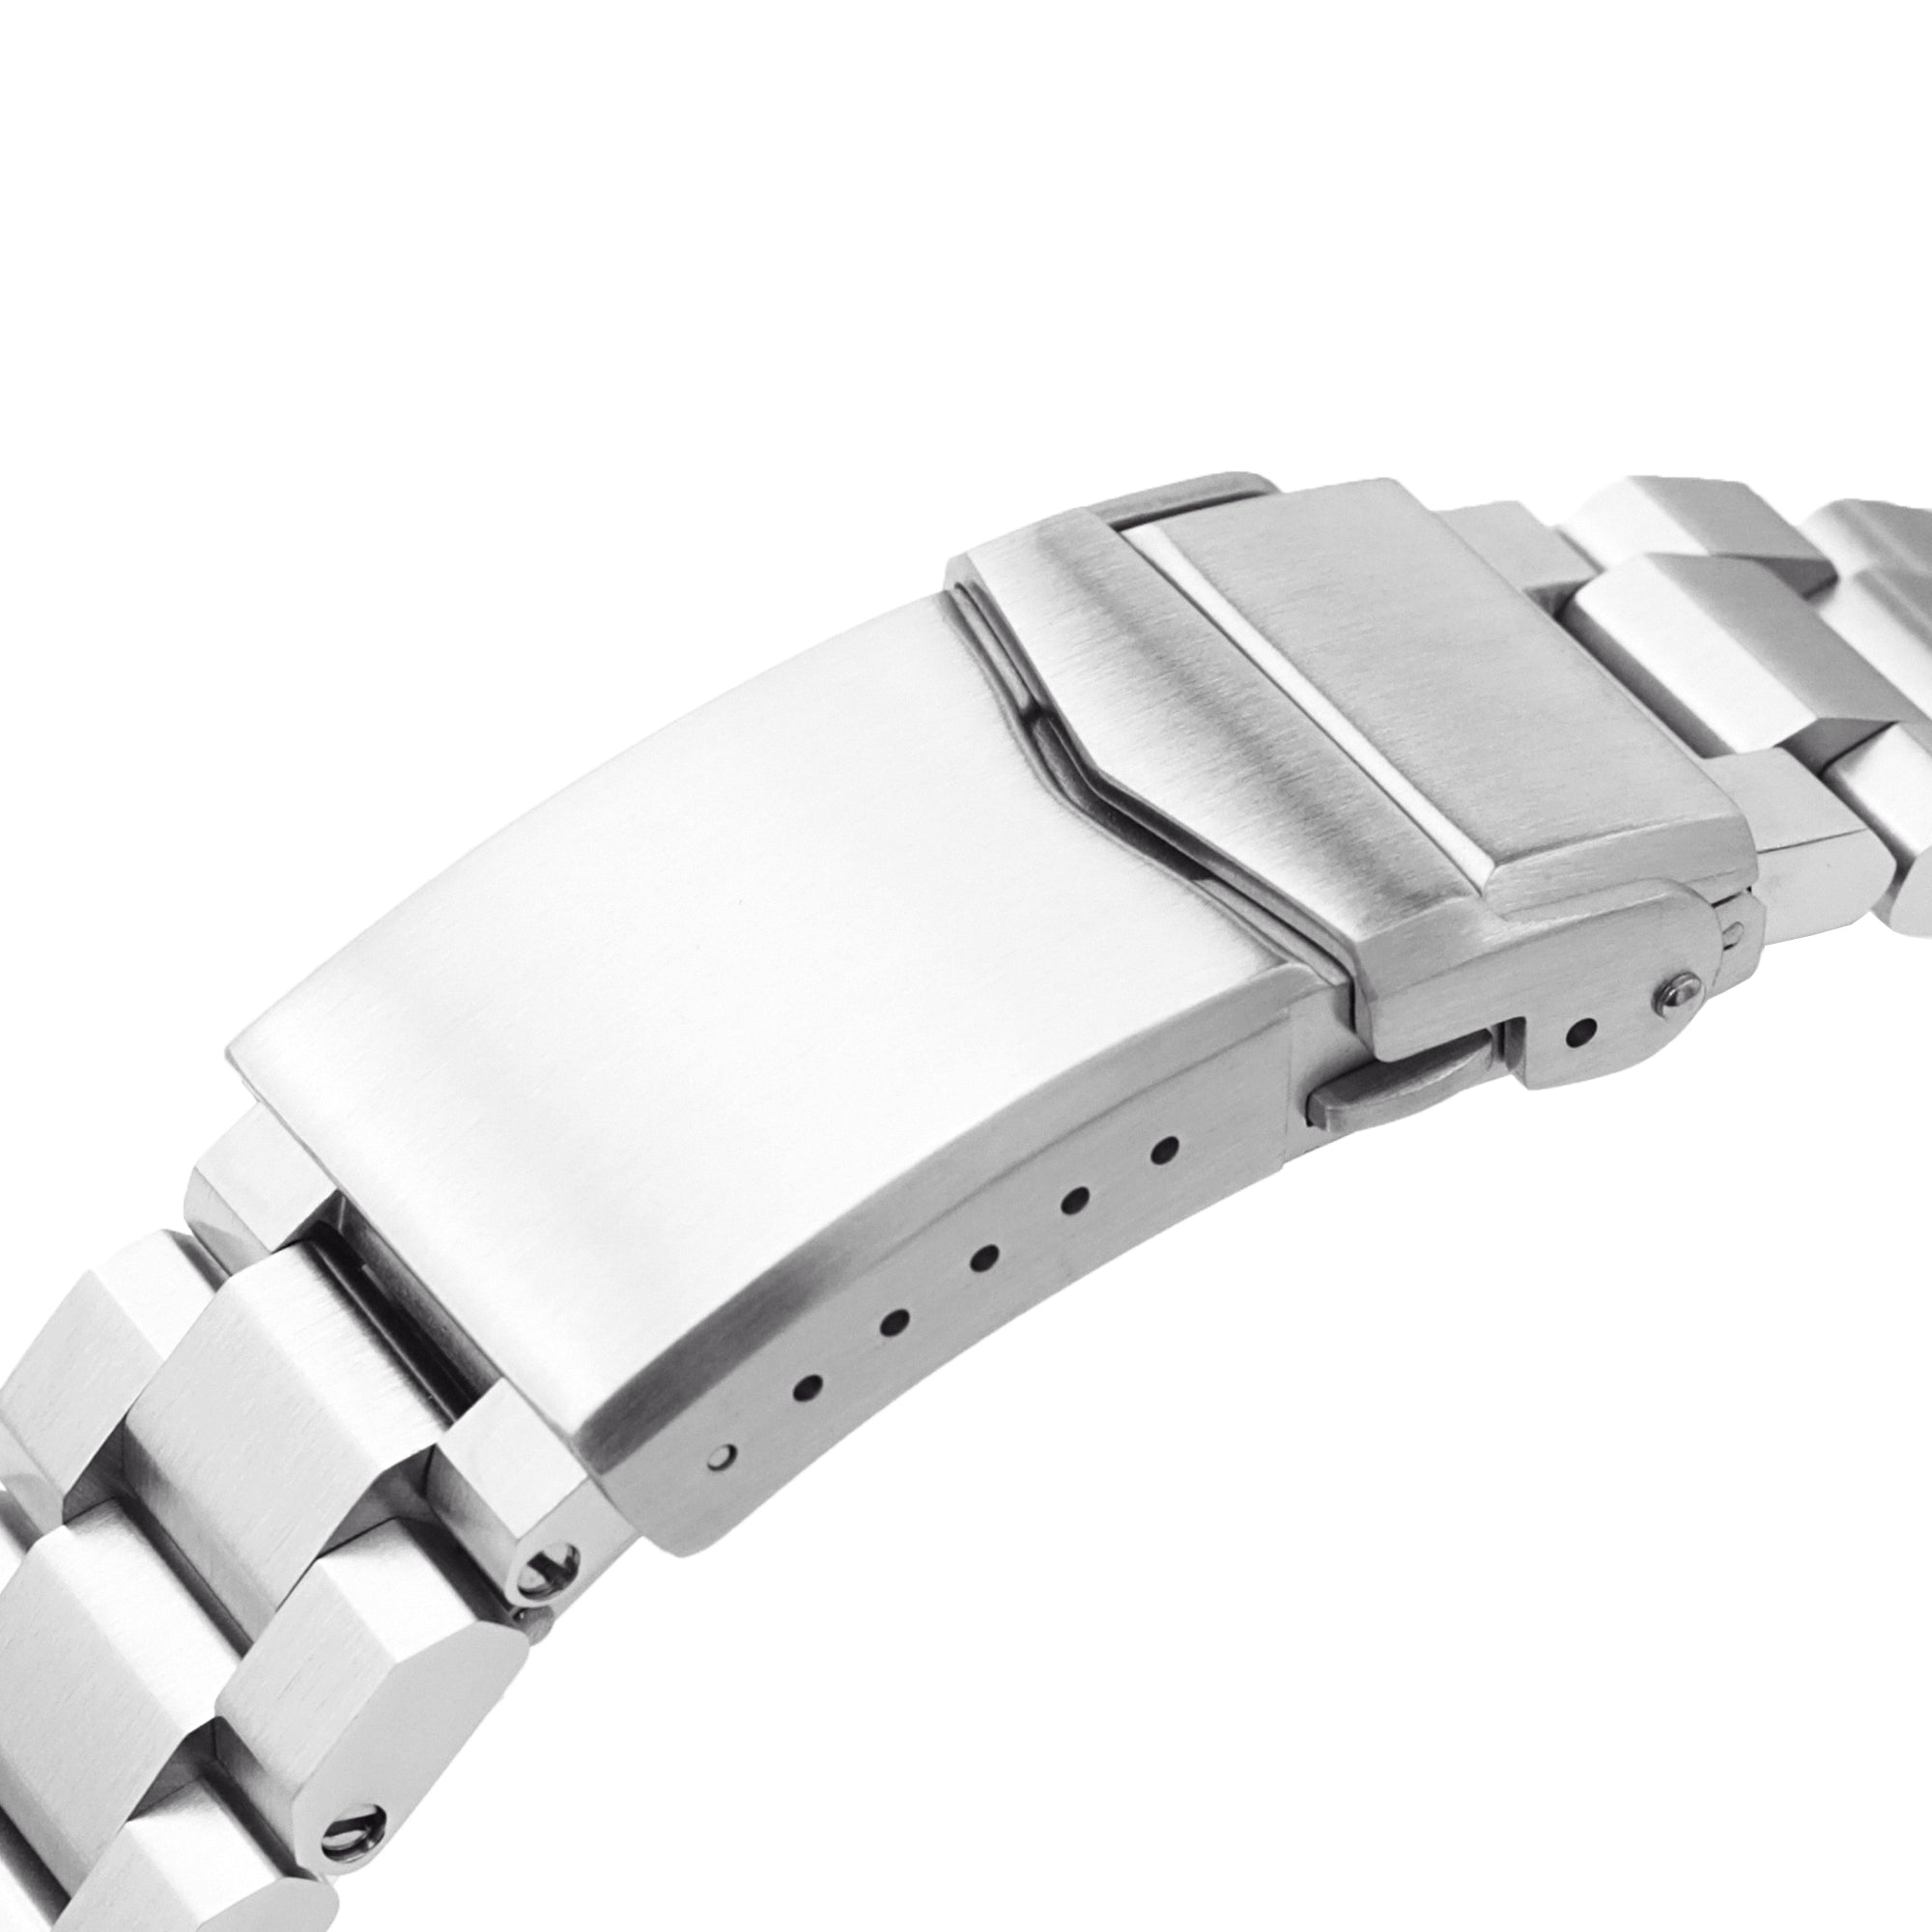  SKM 316L Stainless Steel WatchBand for Patek Philippe